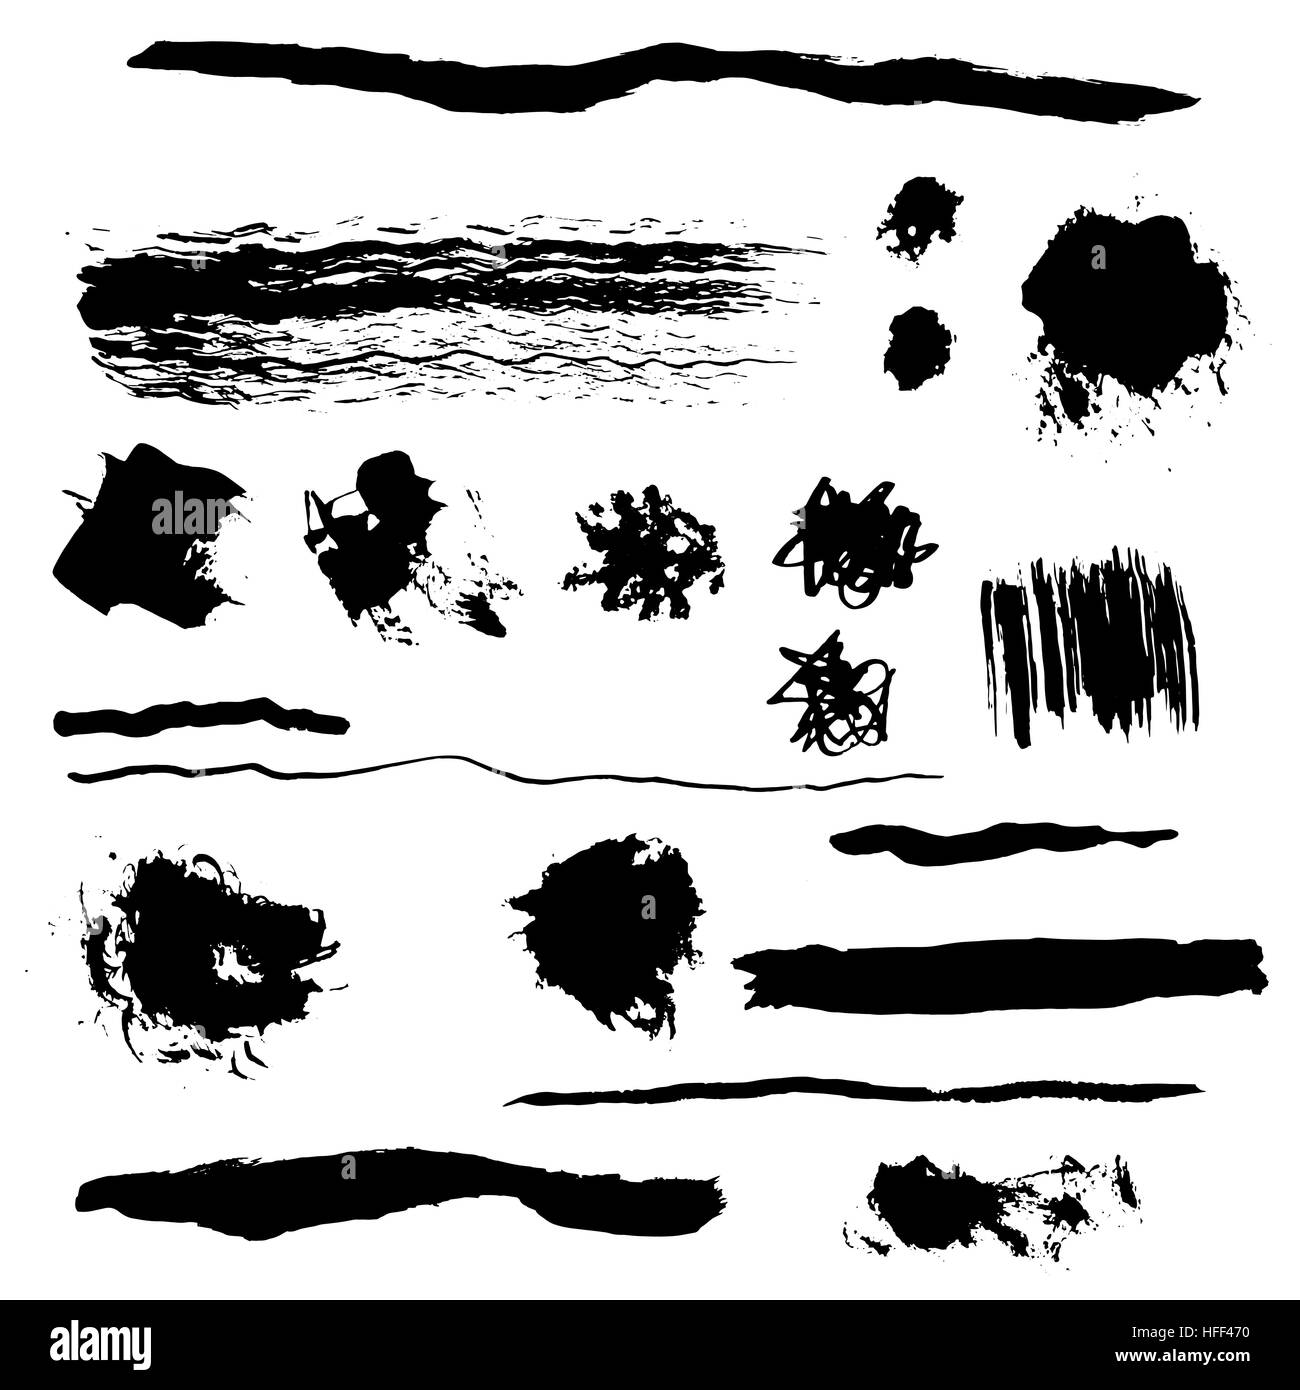 Hand drawn lines, doodles, blobs and splats using artistic media such as pen, pencil, chalk, ink, paint. Stock Vector